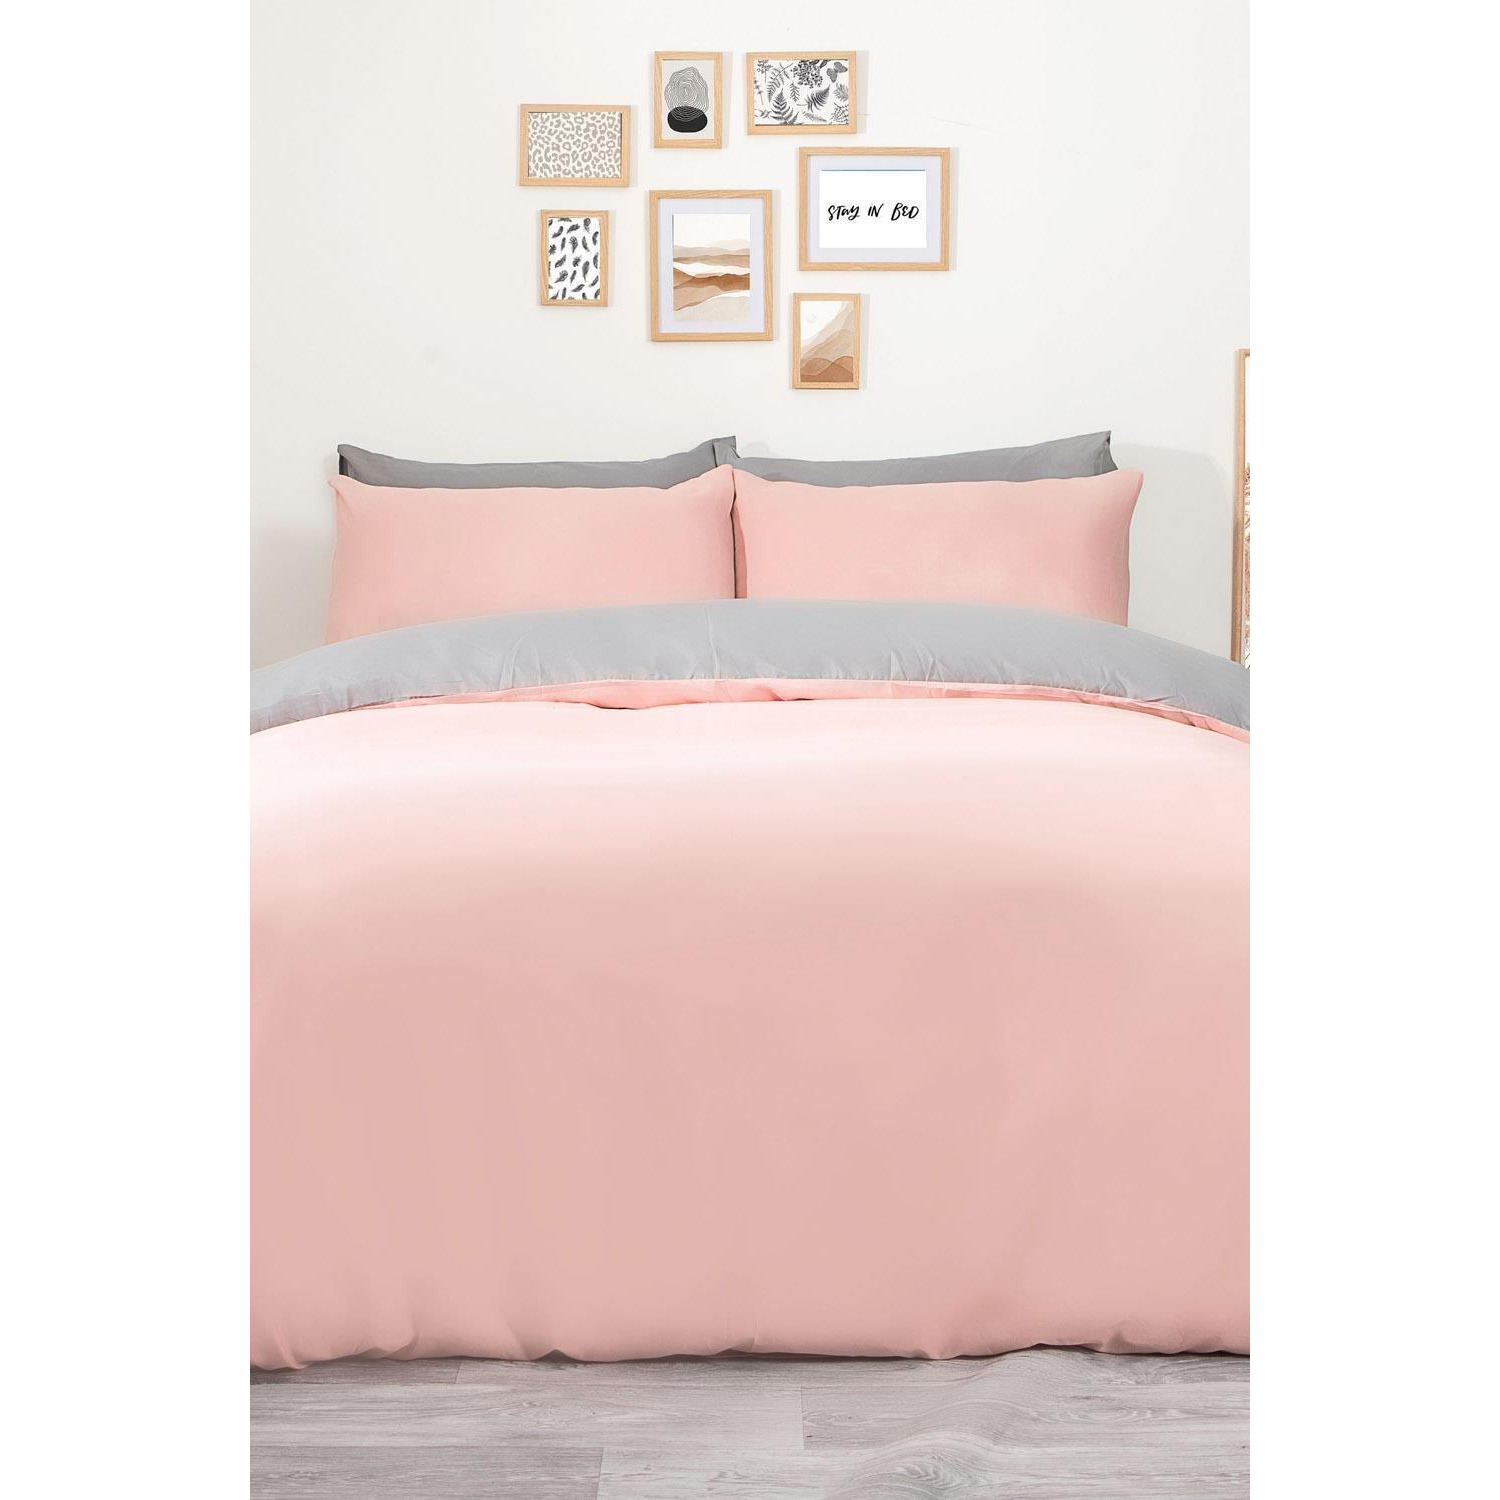 Plain Dyed Reversible Duvet Cover Cover with Pillowcase Set